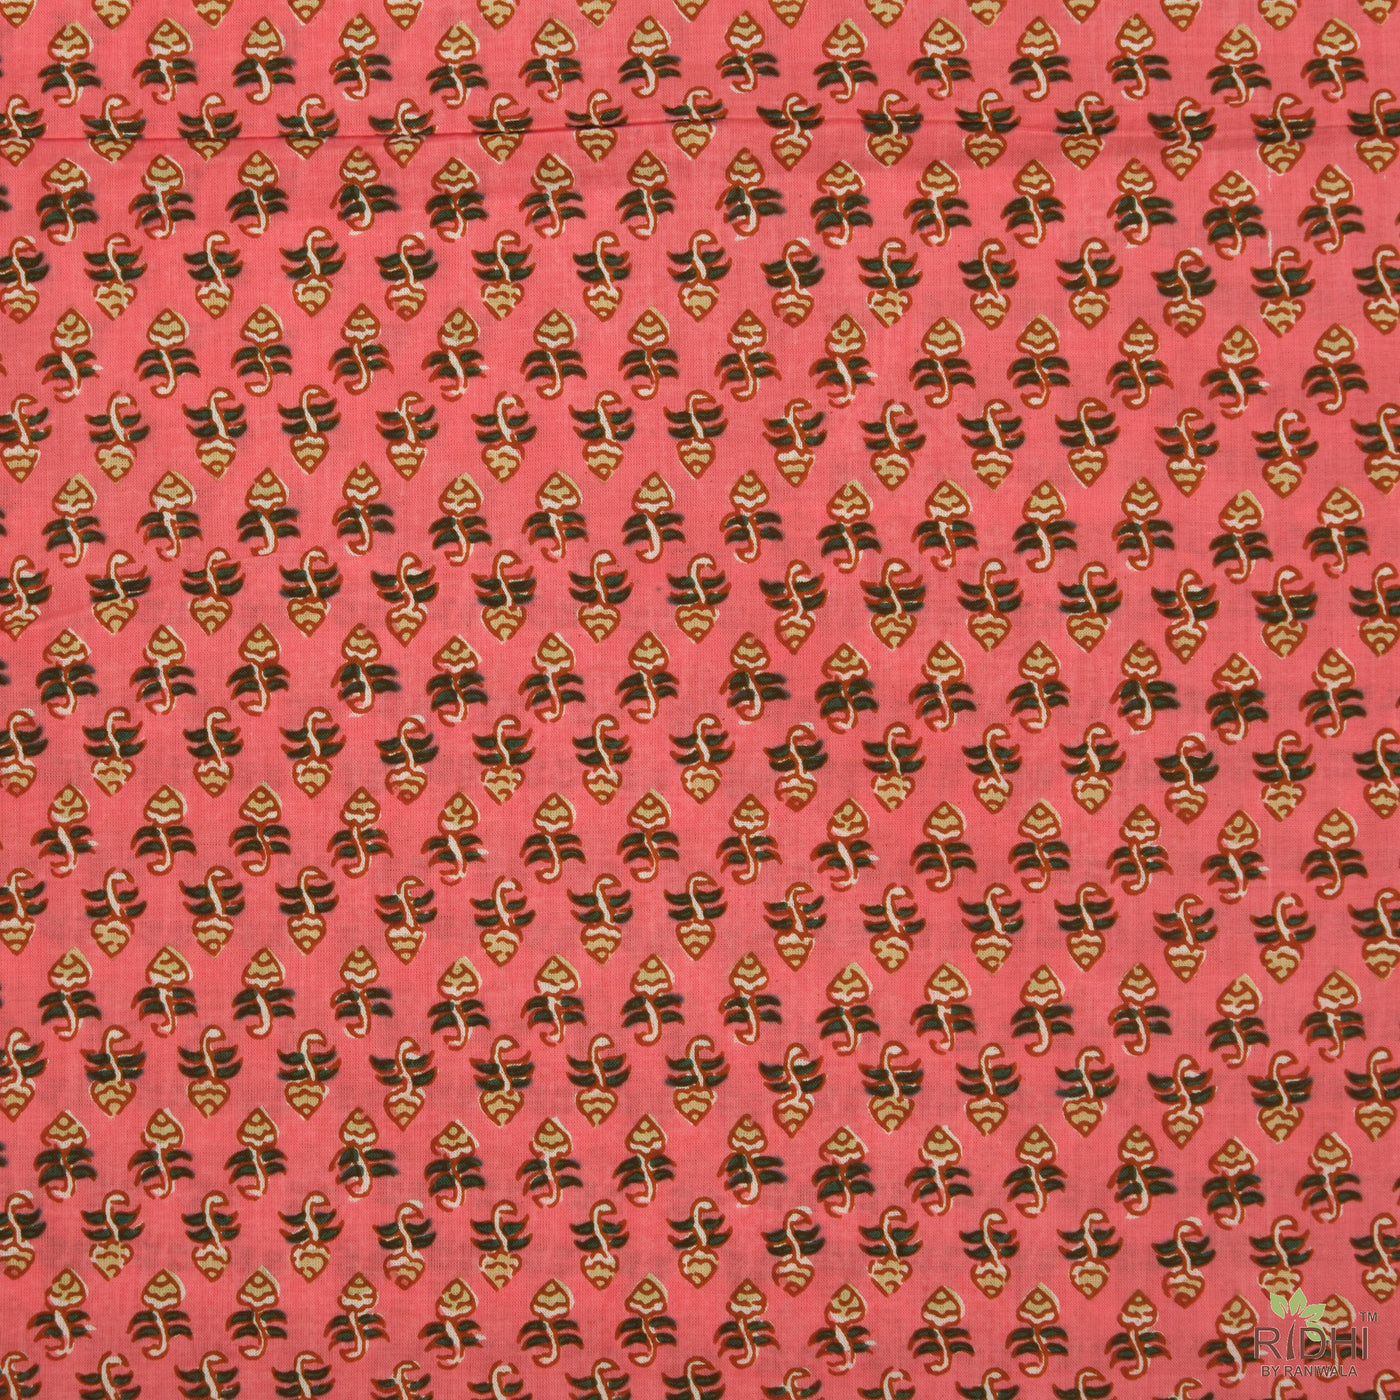 Brick Pink, Hunter Green Indian Floral Printed 100% Cotton Cloth, Fabric by the yard, Curtains Dresses Cushions Pillows Duvet Covers Bags